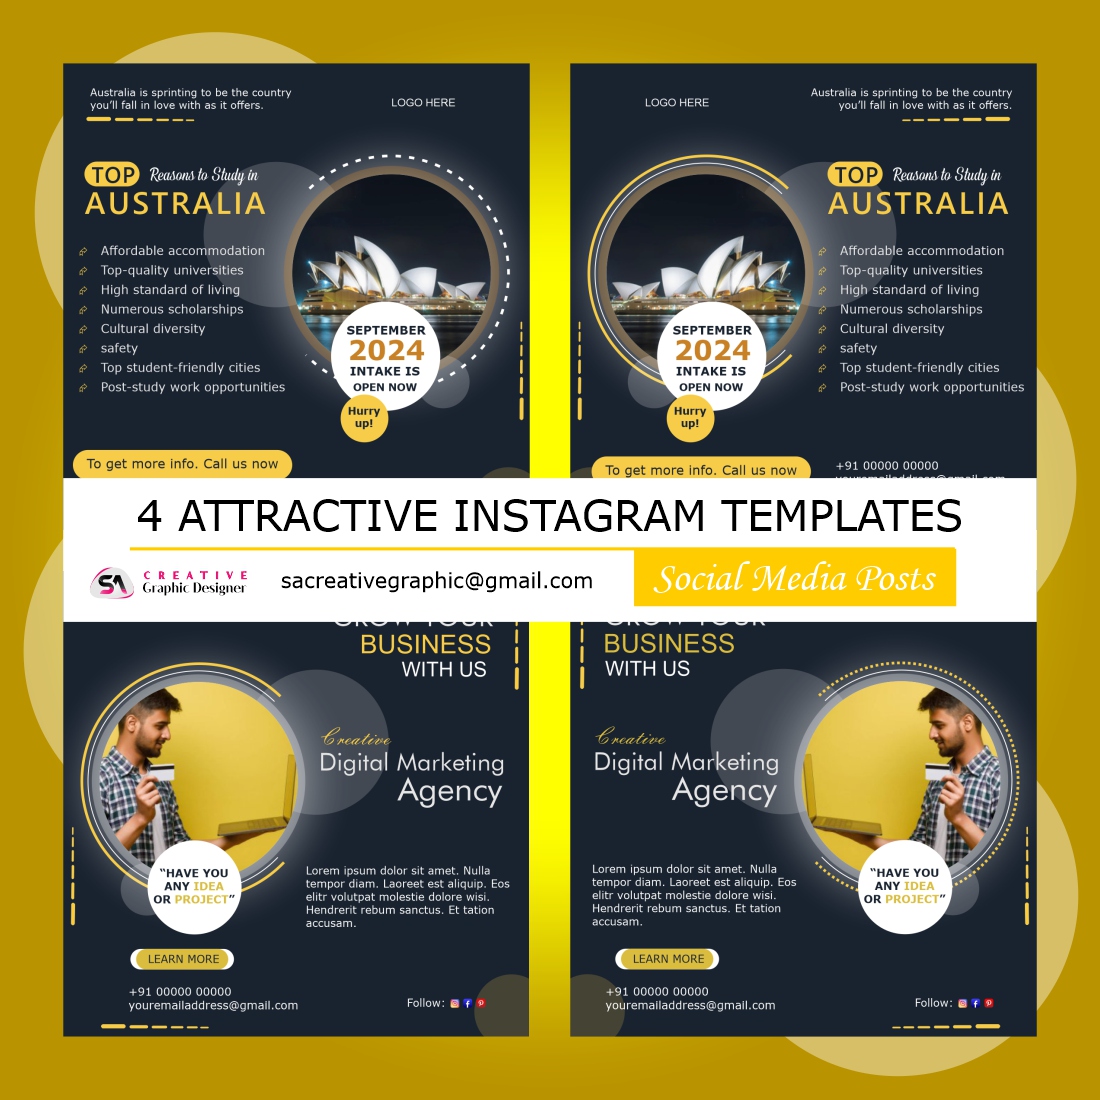 4 Attractive Instagram Templates | Social Media Posts preview image.